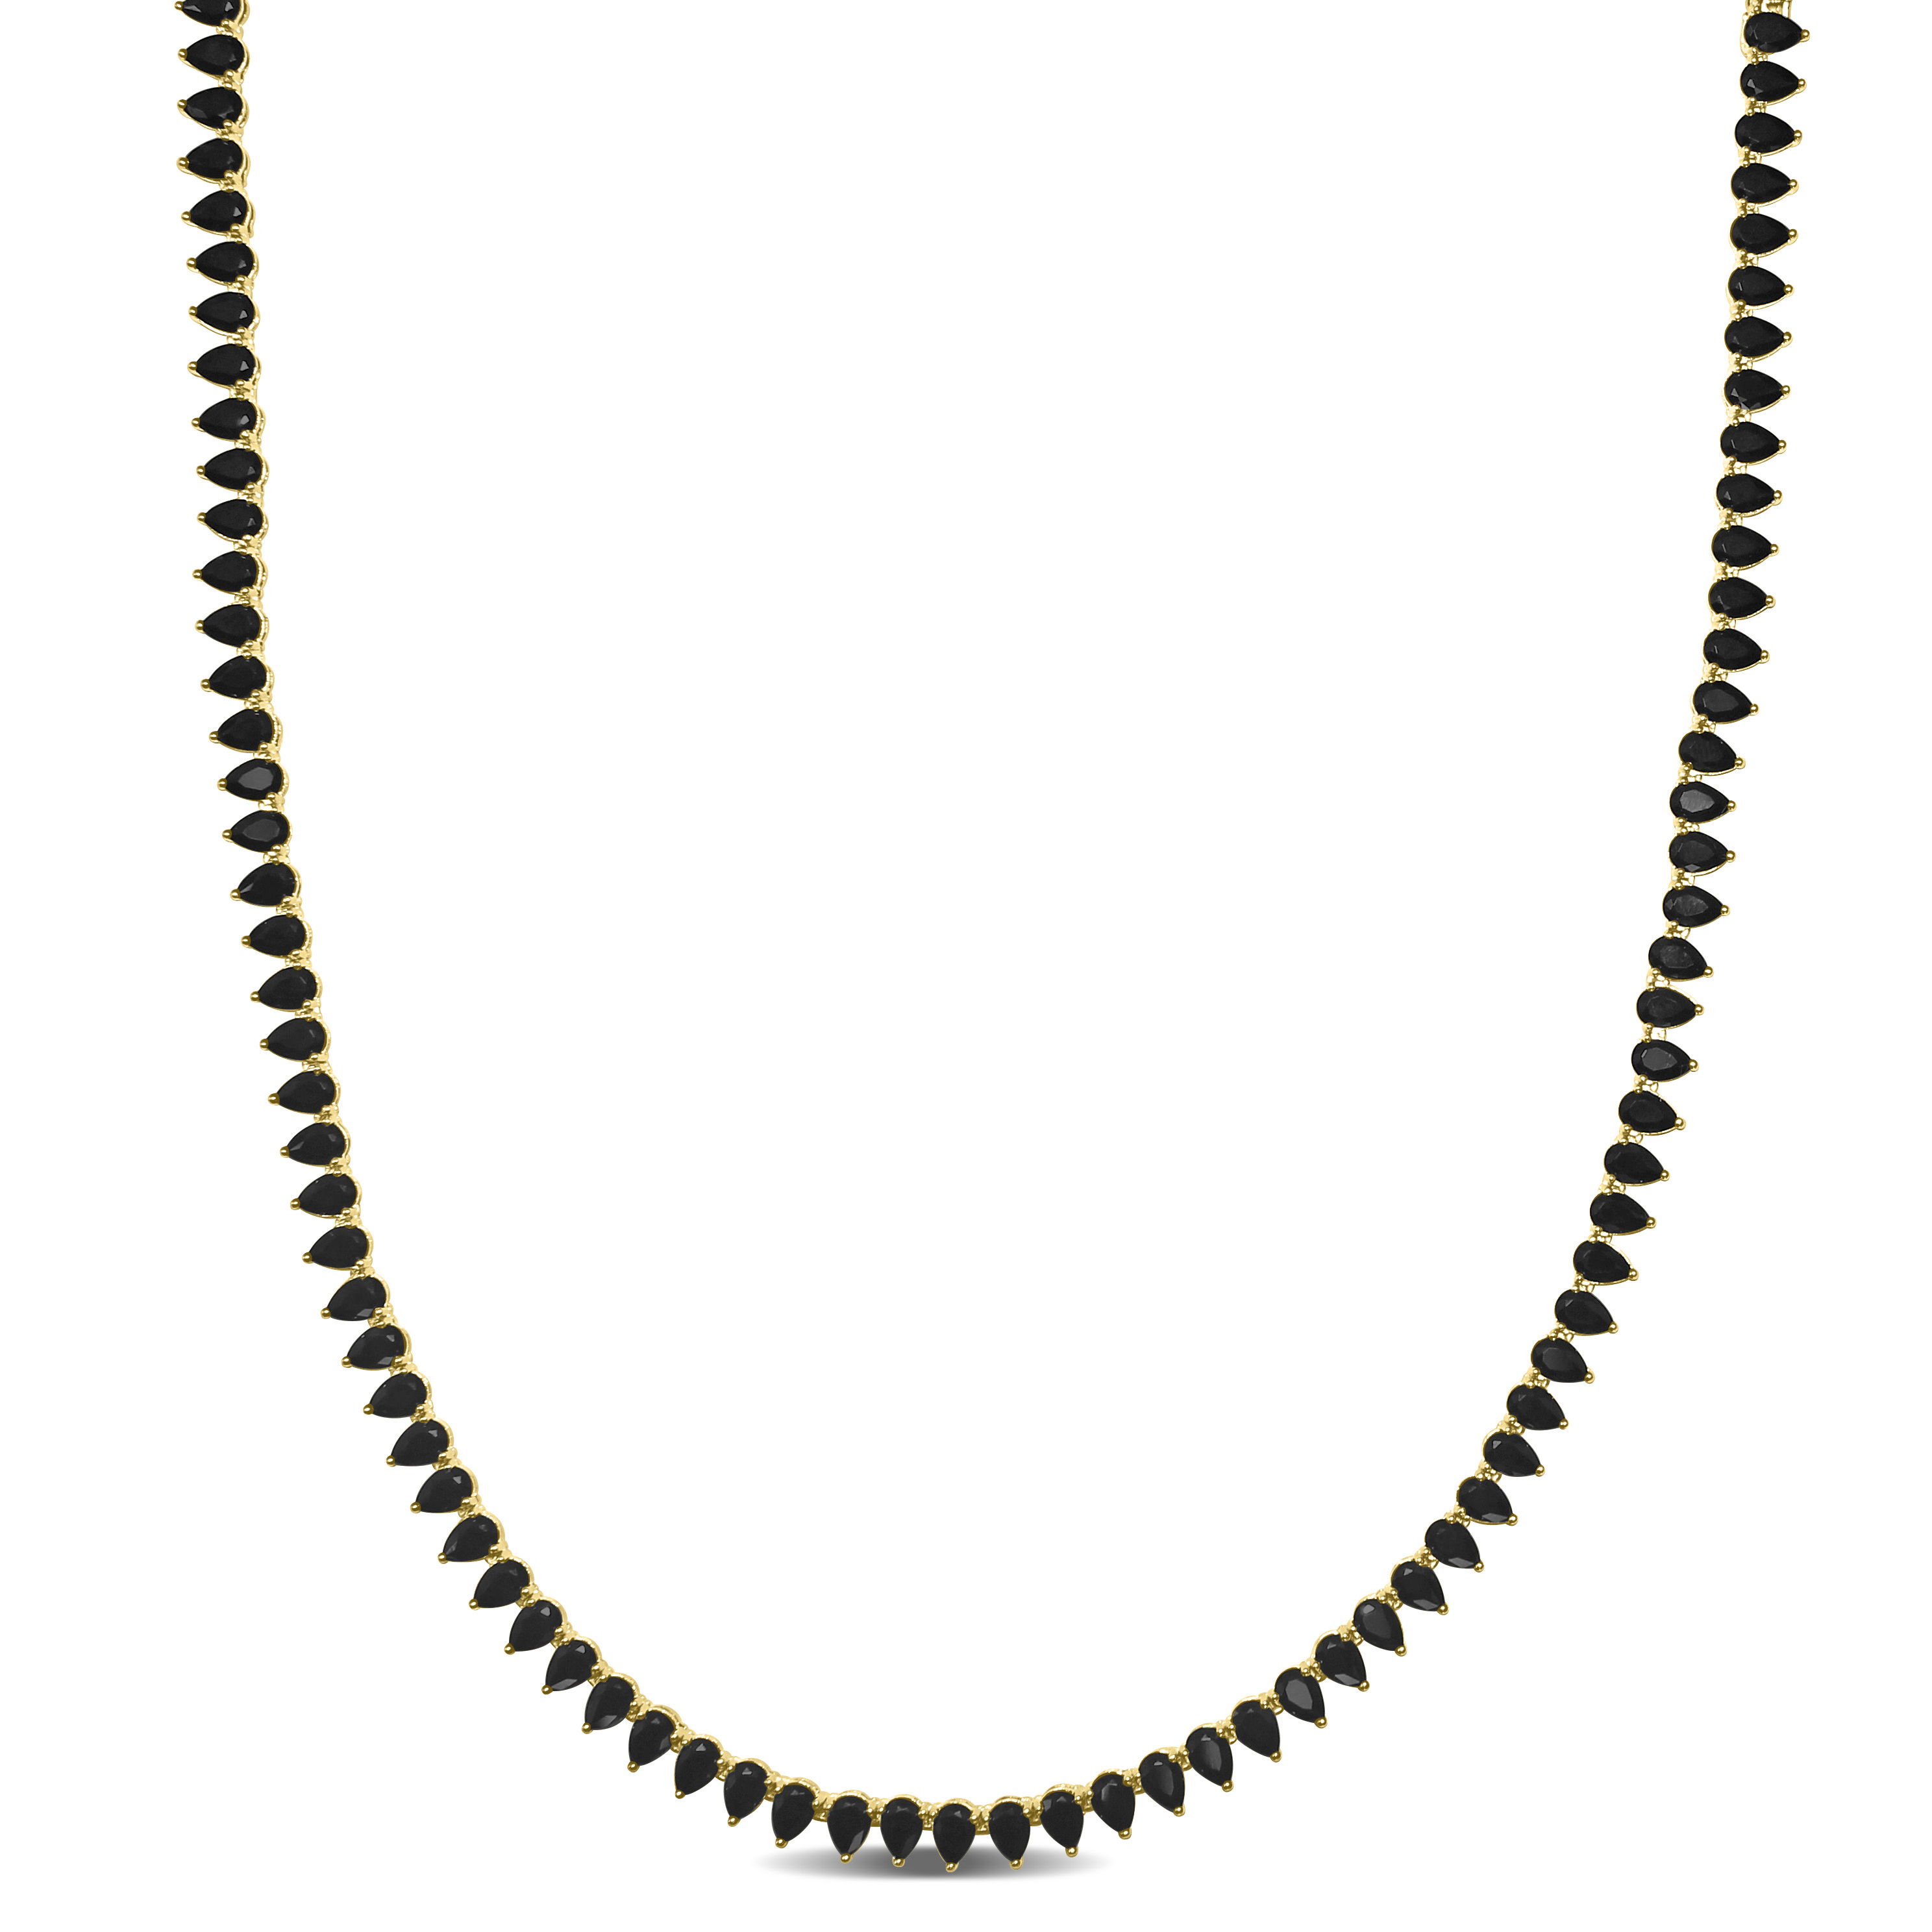 44 1/2 CT TGW Synthetic Black Pear Cut Spinel Tennis Necklace in Yellow Plated Sterling Silver - 18 in.